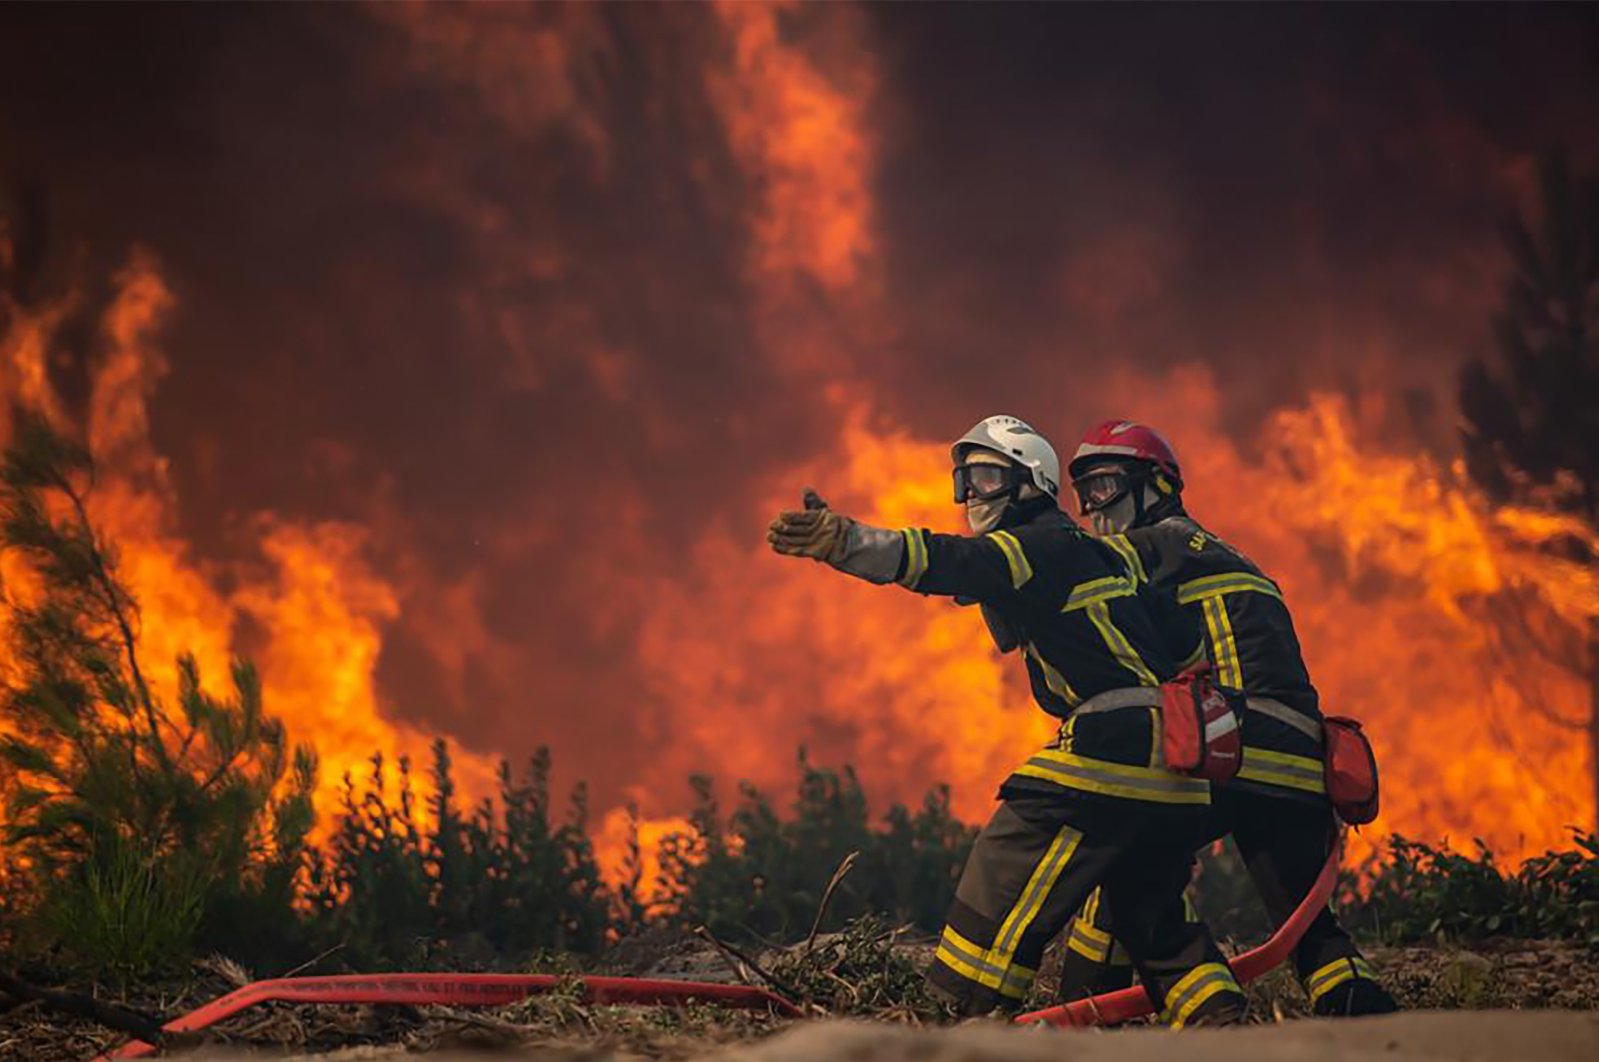 This photo provided by the fire brigade of the Gironde region (SDIS 33) shows firefighters unrolling a fire hose at a forest fire at La Test-de-Buch, southwestern France, July 18, 2022. France scrambled to coordinate more water-bombing planes and hundreds more firefighters to combat spreading wildfires that were being fed Monday by hot swirling winds from a searing heat wave broiling much of Europe. (SDIS 33 via AP)